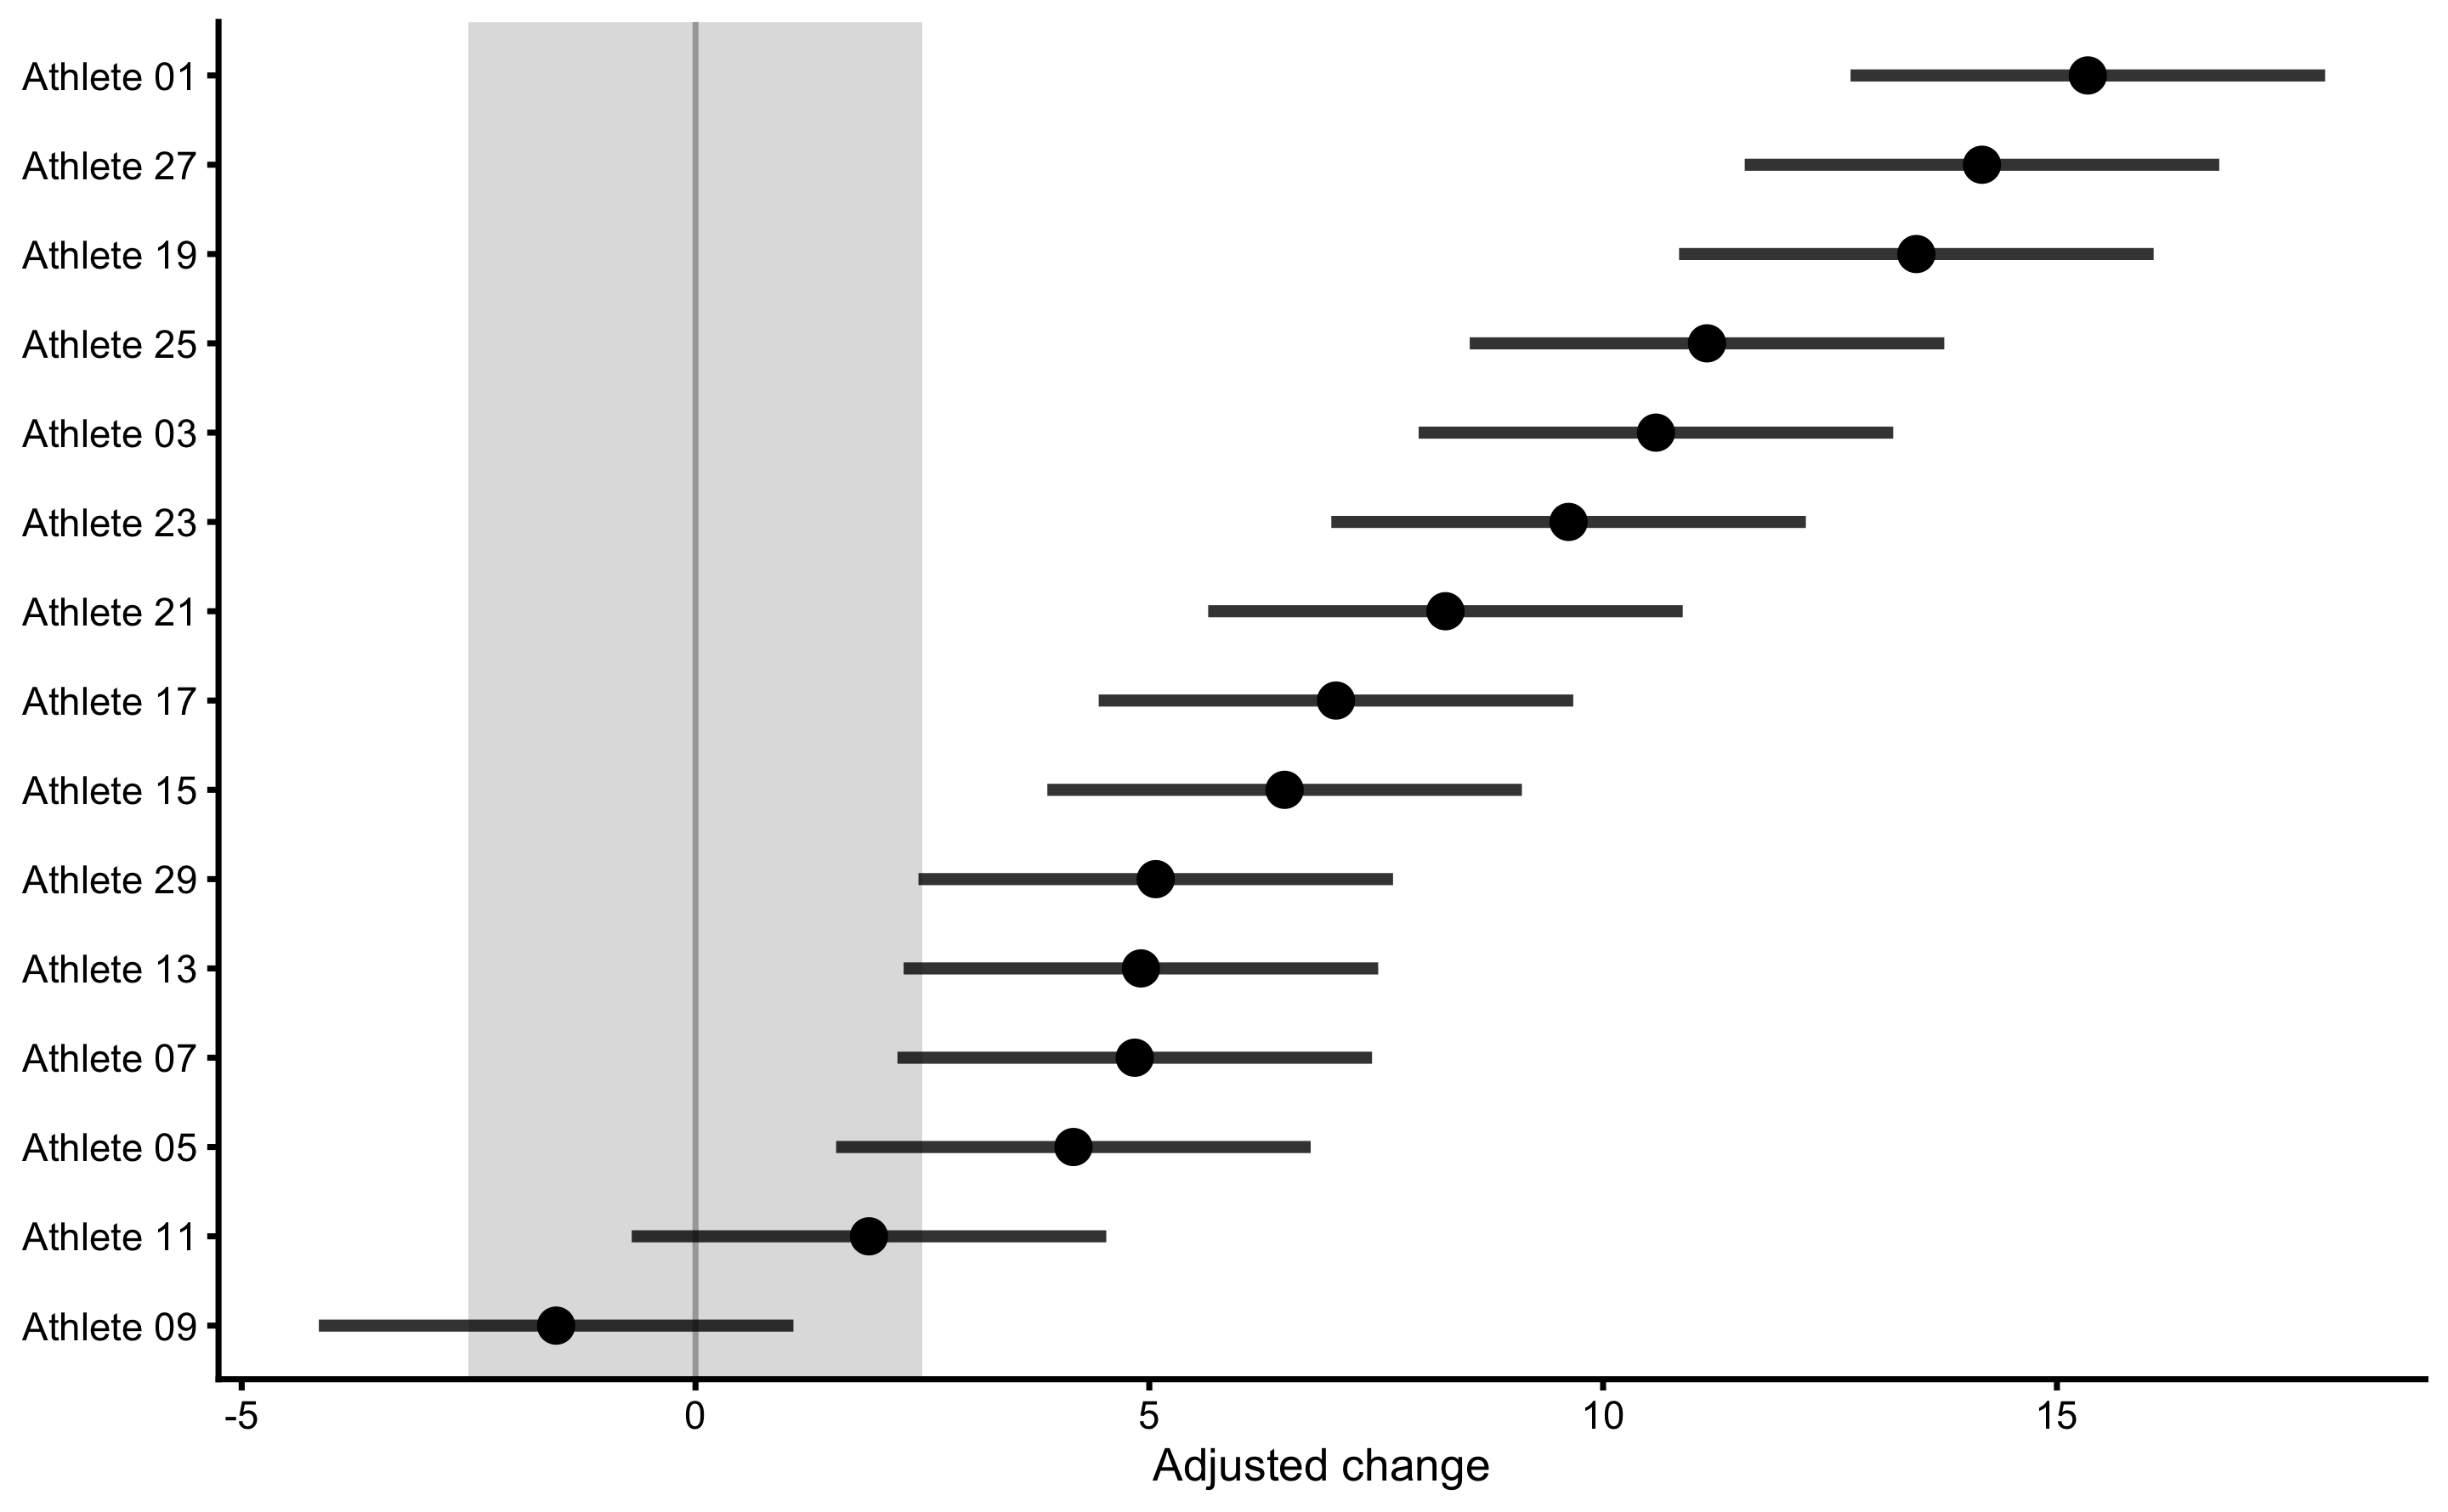 Responses analysis for the Treatment group. Change scores are adjusted by deducting Control group mean change. Error bars represent smallest detectable change (SDC) that is calculated using SD of the Control group change scores multiplied by 1.96 (to get 95% levels containing 95% of the change distribution).